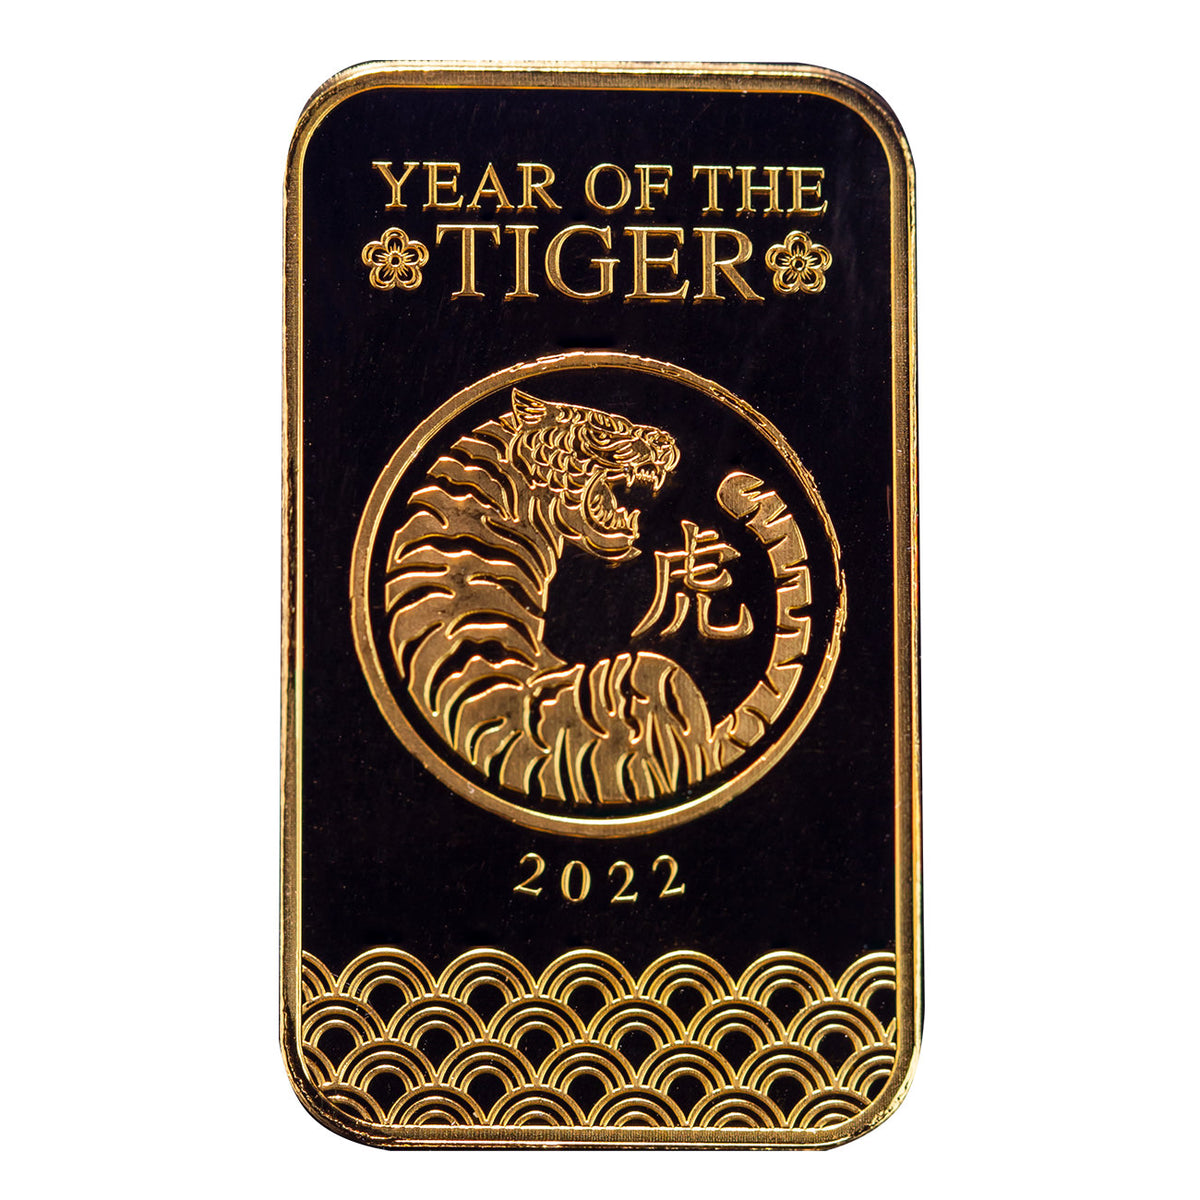 Scottsdale Mint 2022 Year of the Tiger 1 oz Gold Bar